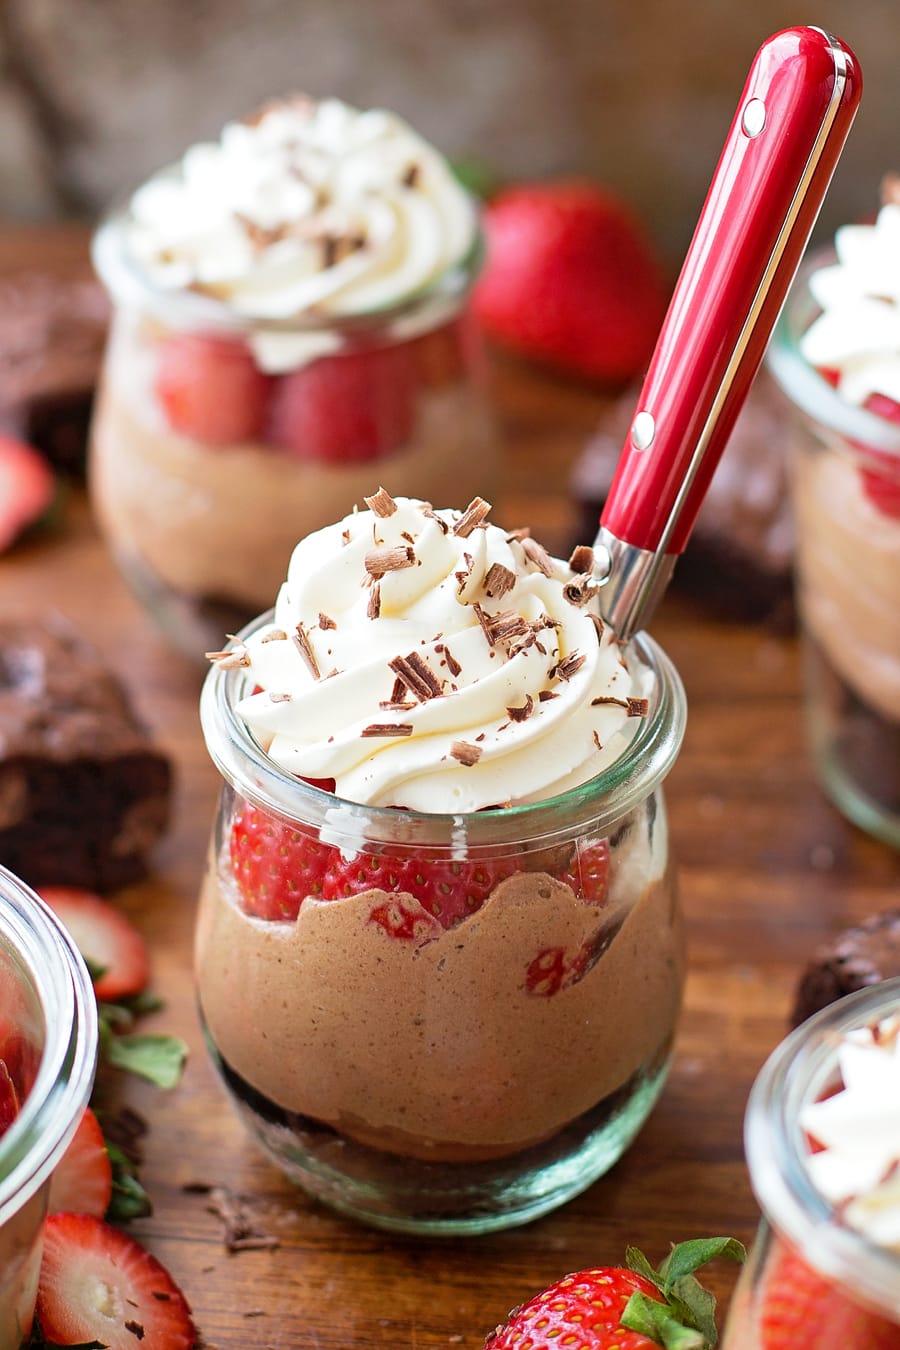 No-Bake Strawberry Nutella Cheesecakes topped with whipped cream and chocoalte shavings